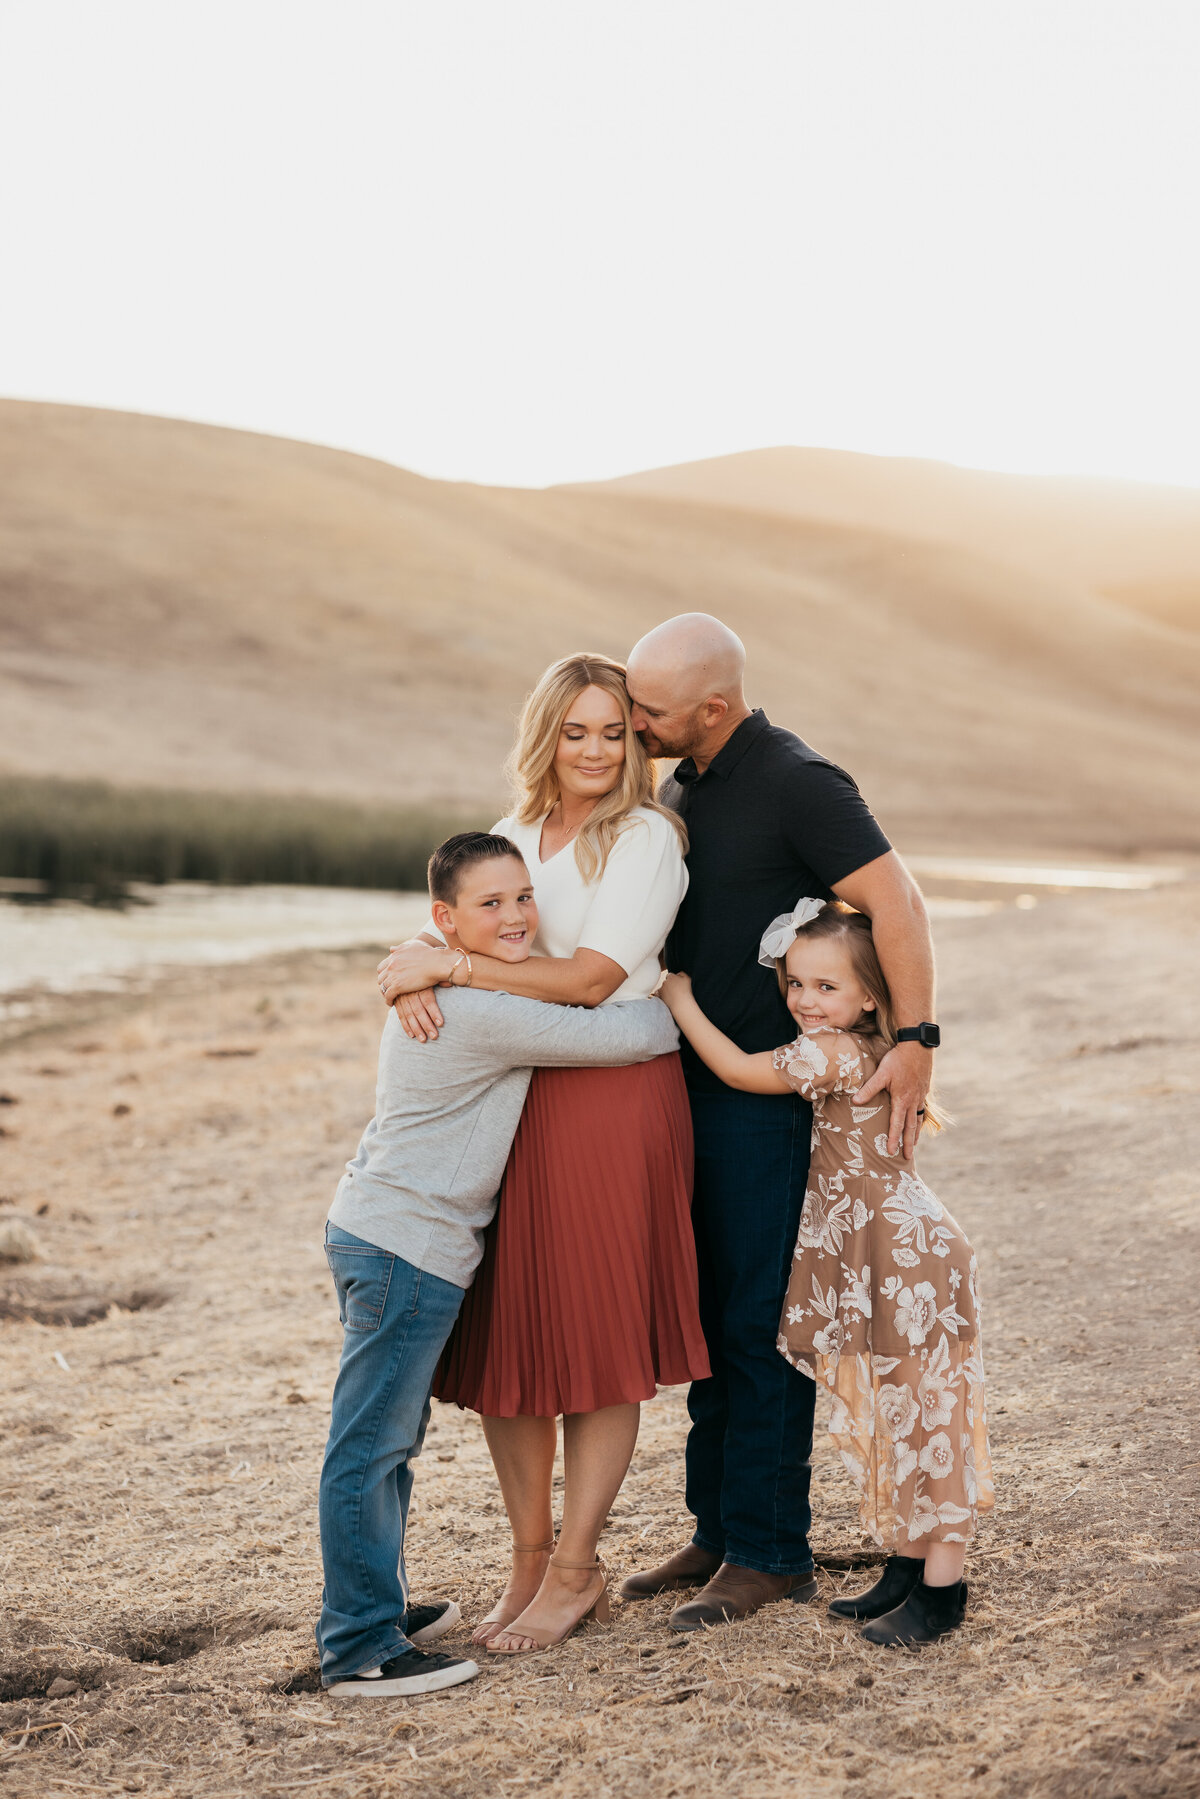 Family photographer Jolee henley photography is in the central valley of california. I specialize in wedding and family photography in the Modesto ca area.